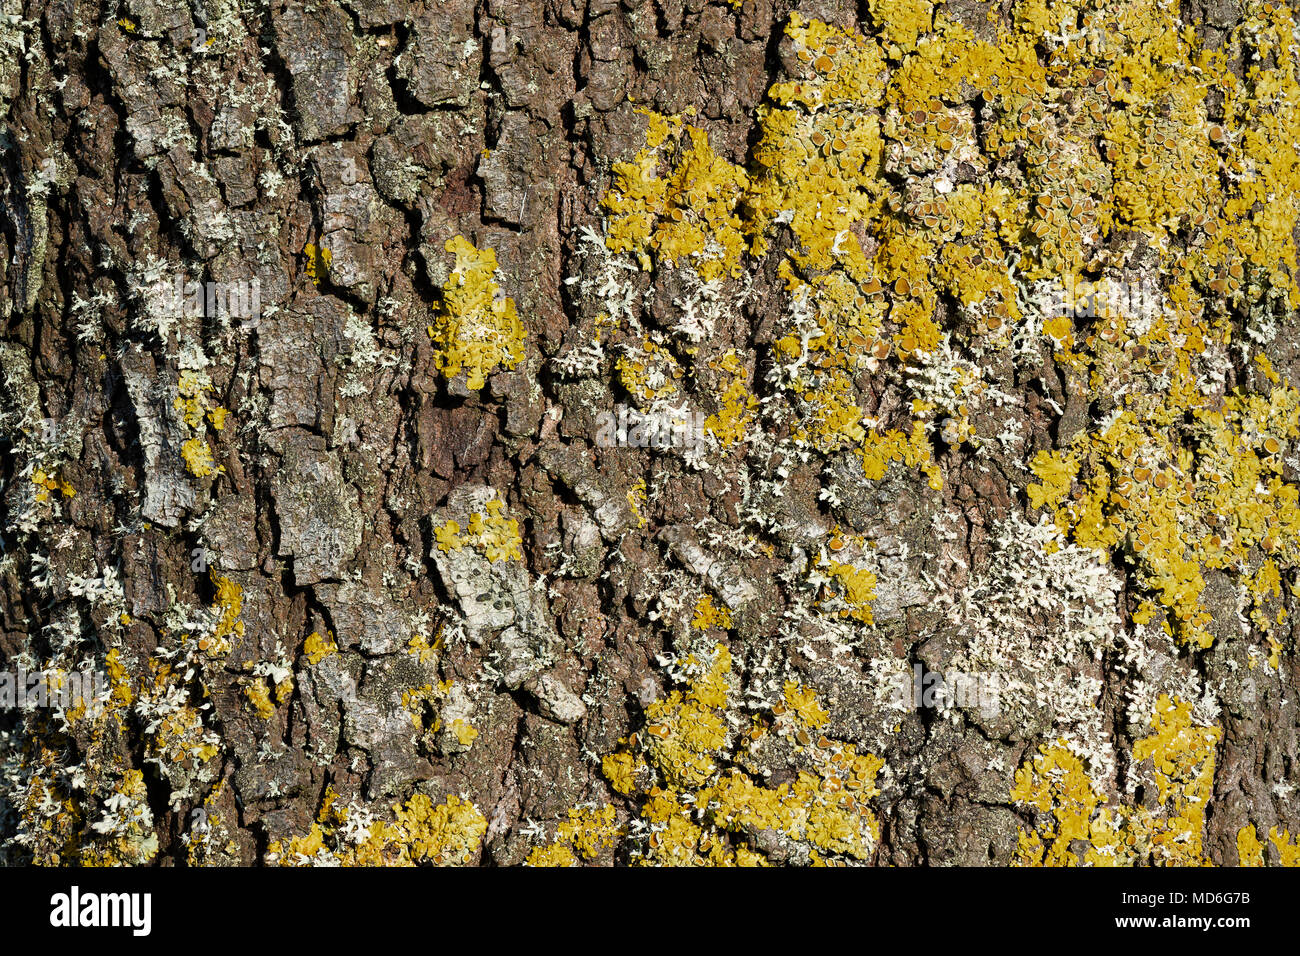 Yellow lichen on the bark of a tree trunk Stock Photo